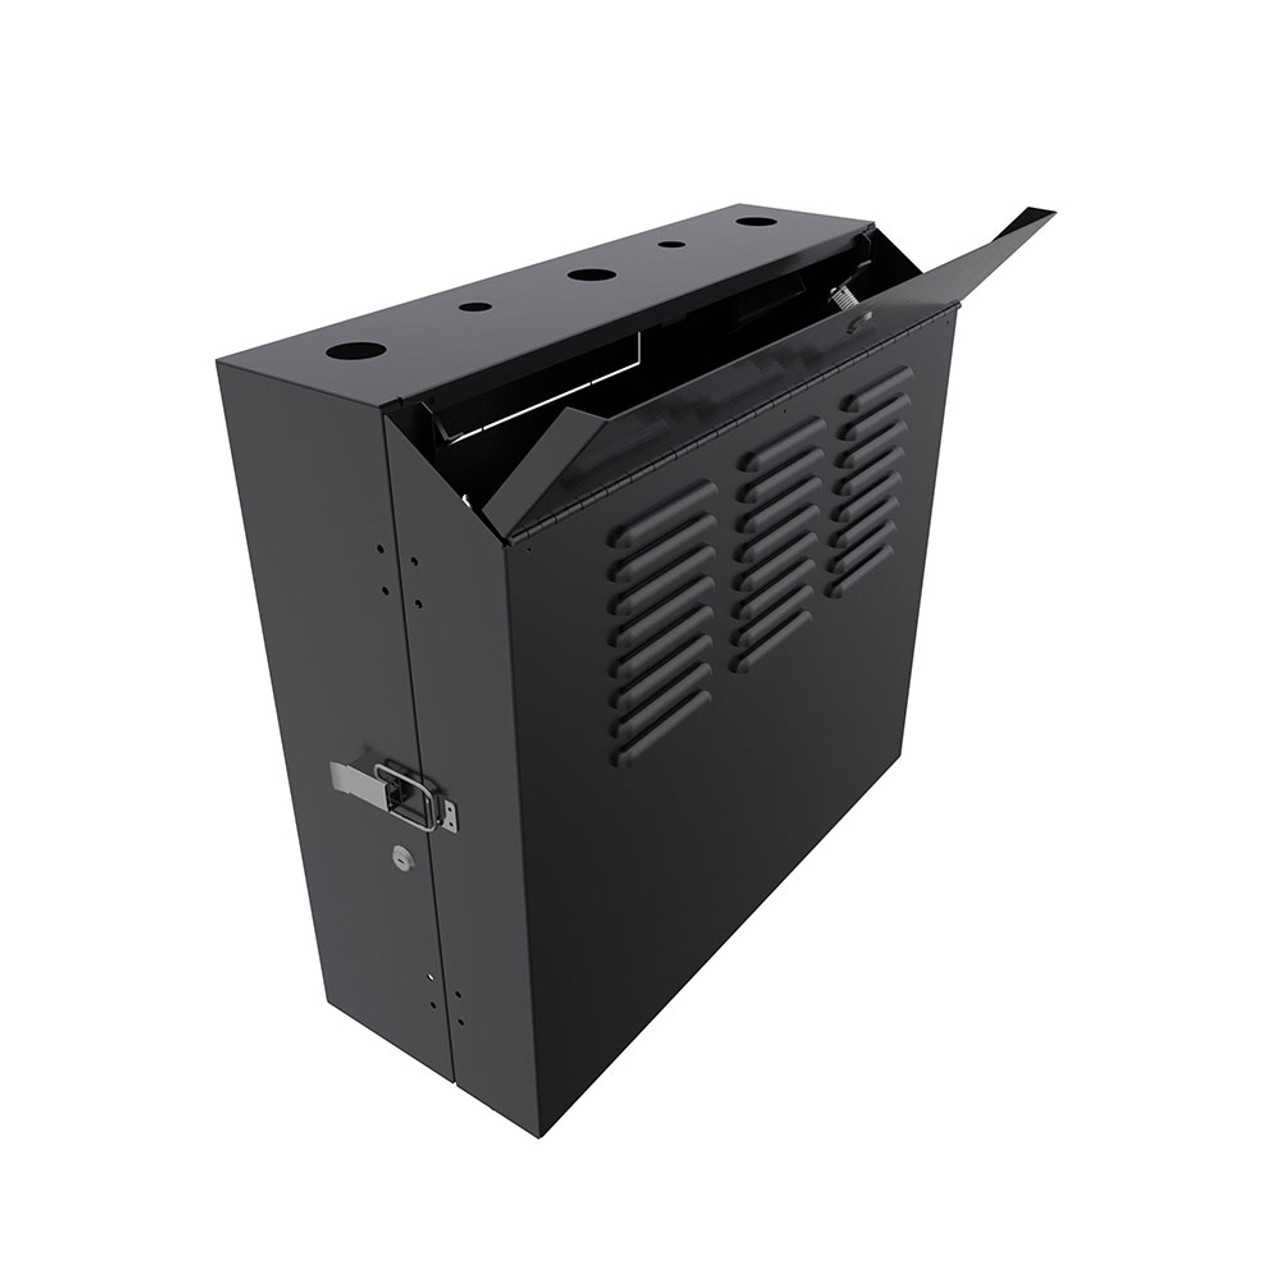 5U Vertical Wall Mount Enclosure, 12.7 inch (325mm) to 15.7 inch (400mm) depth, Cold-rolled Steel, Black